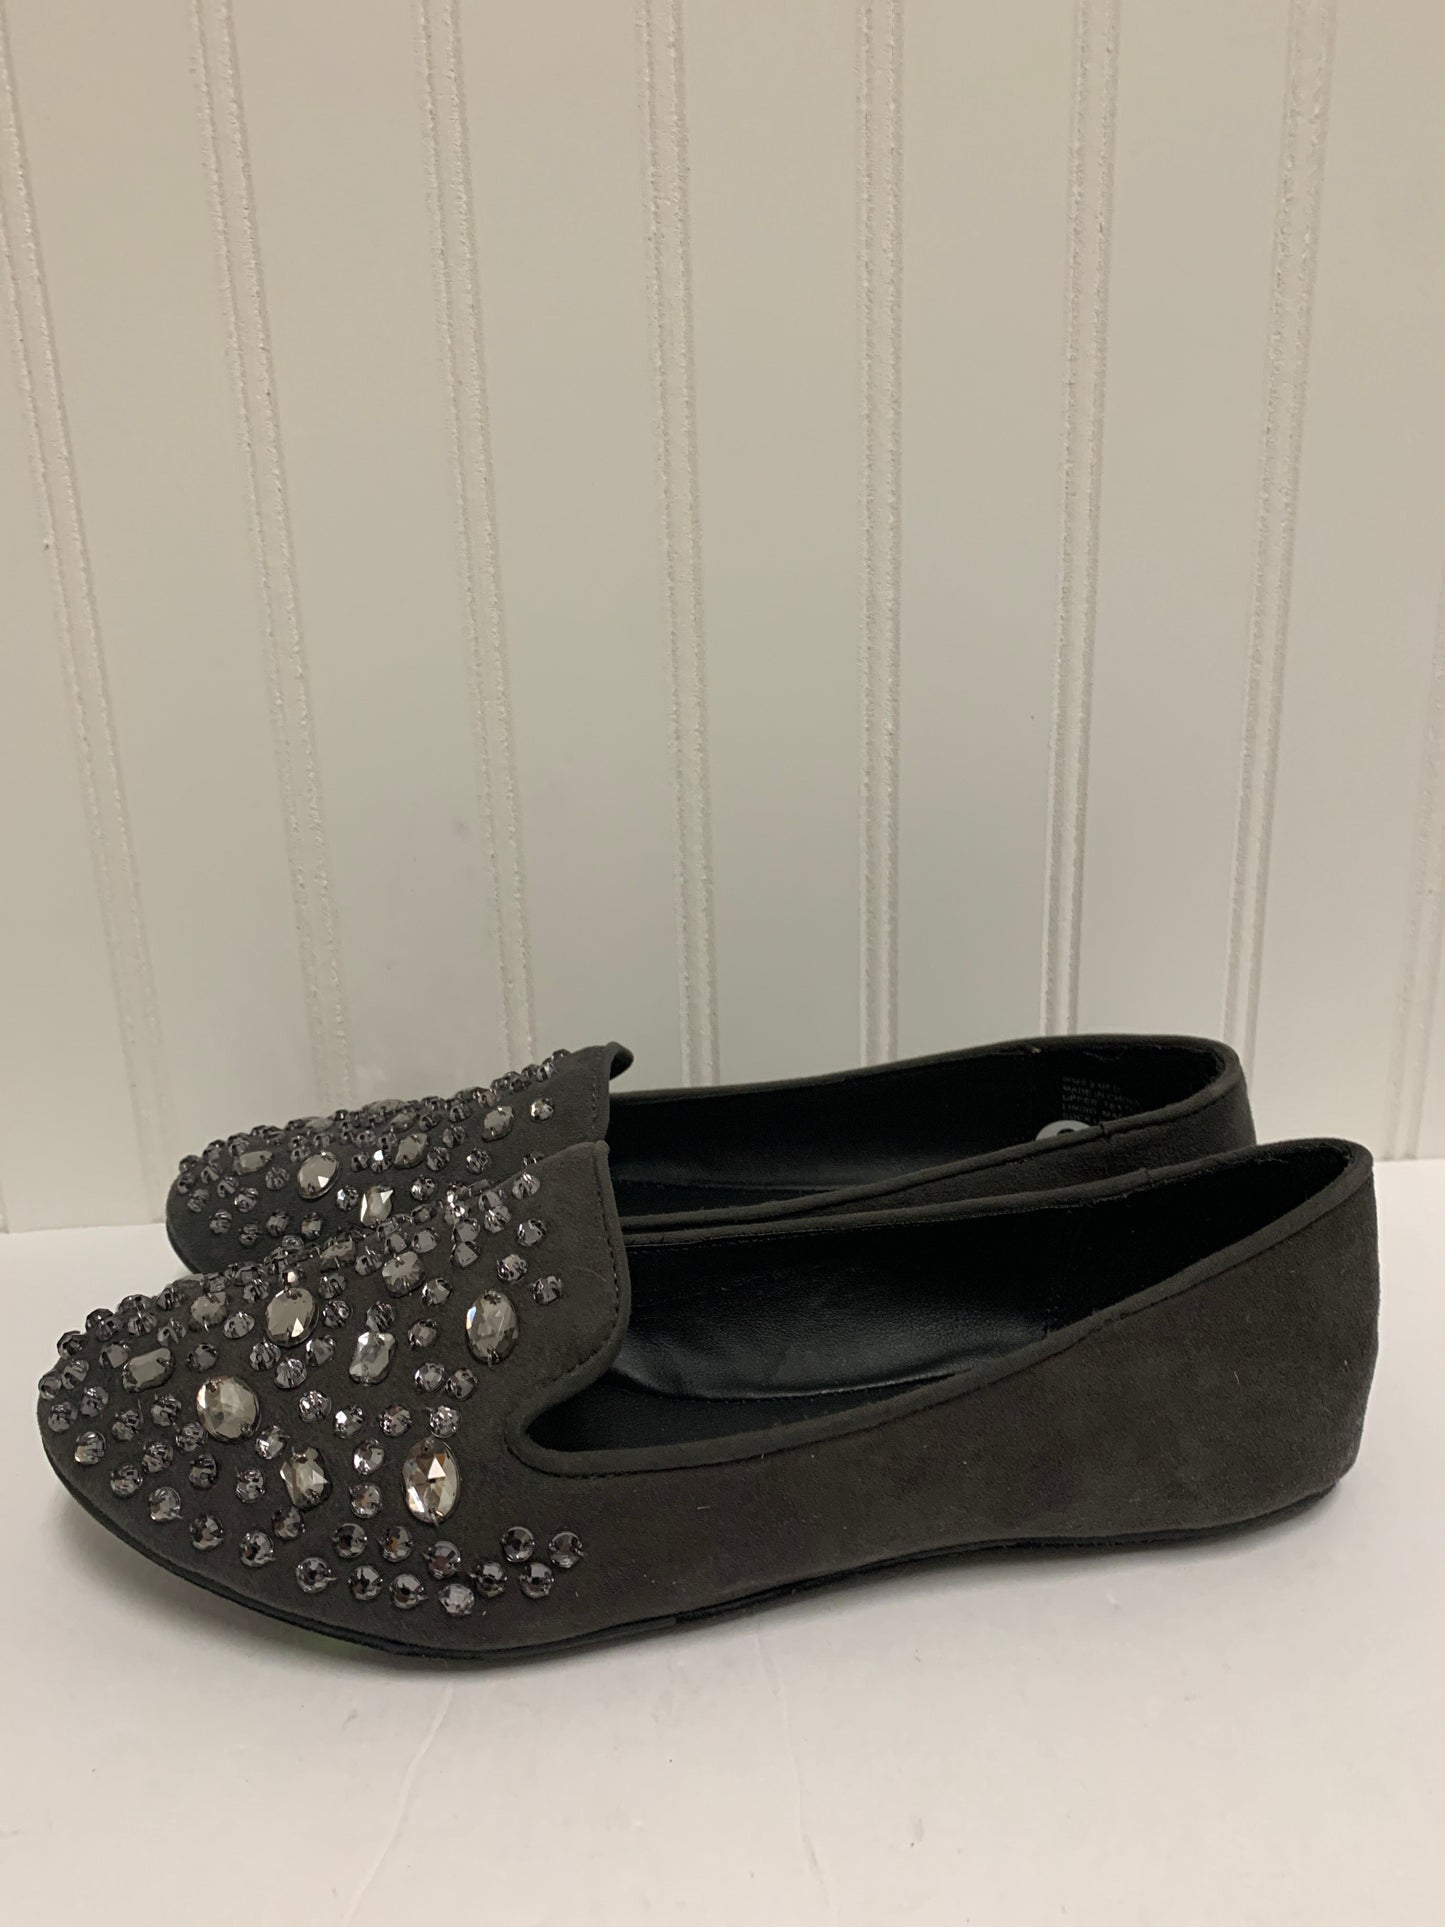 Shoes Flats By Vera Wang  Size: 9